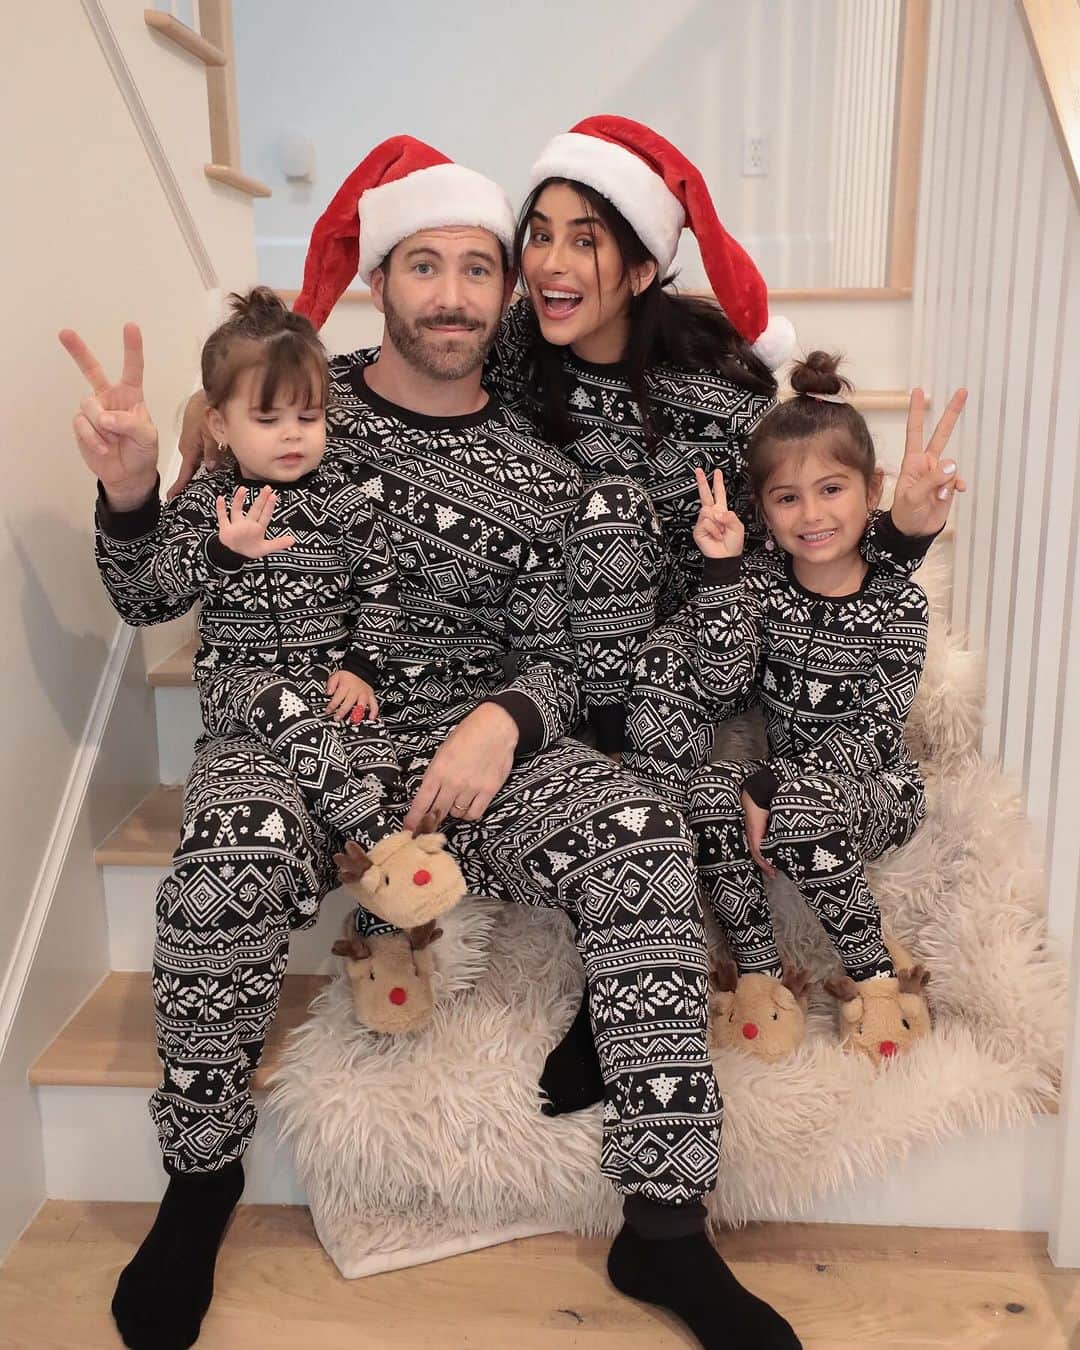 Sazan Hendrixのインスタグラム：「This is your reminder that there are 60 days until Christmas! 6 days until we start playing holiday music, and 12 days until we put up our tree up. Get the family’s matching PJ’s ready! The great debate 👉🏽How soon is too soon - when do you get into the holiday spirit?🎄🤝🏽😜 @childrensplace #ad」